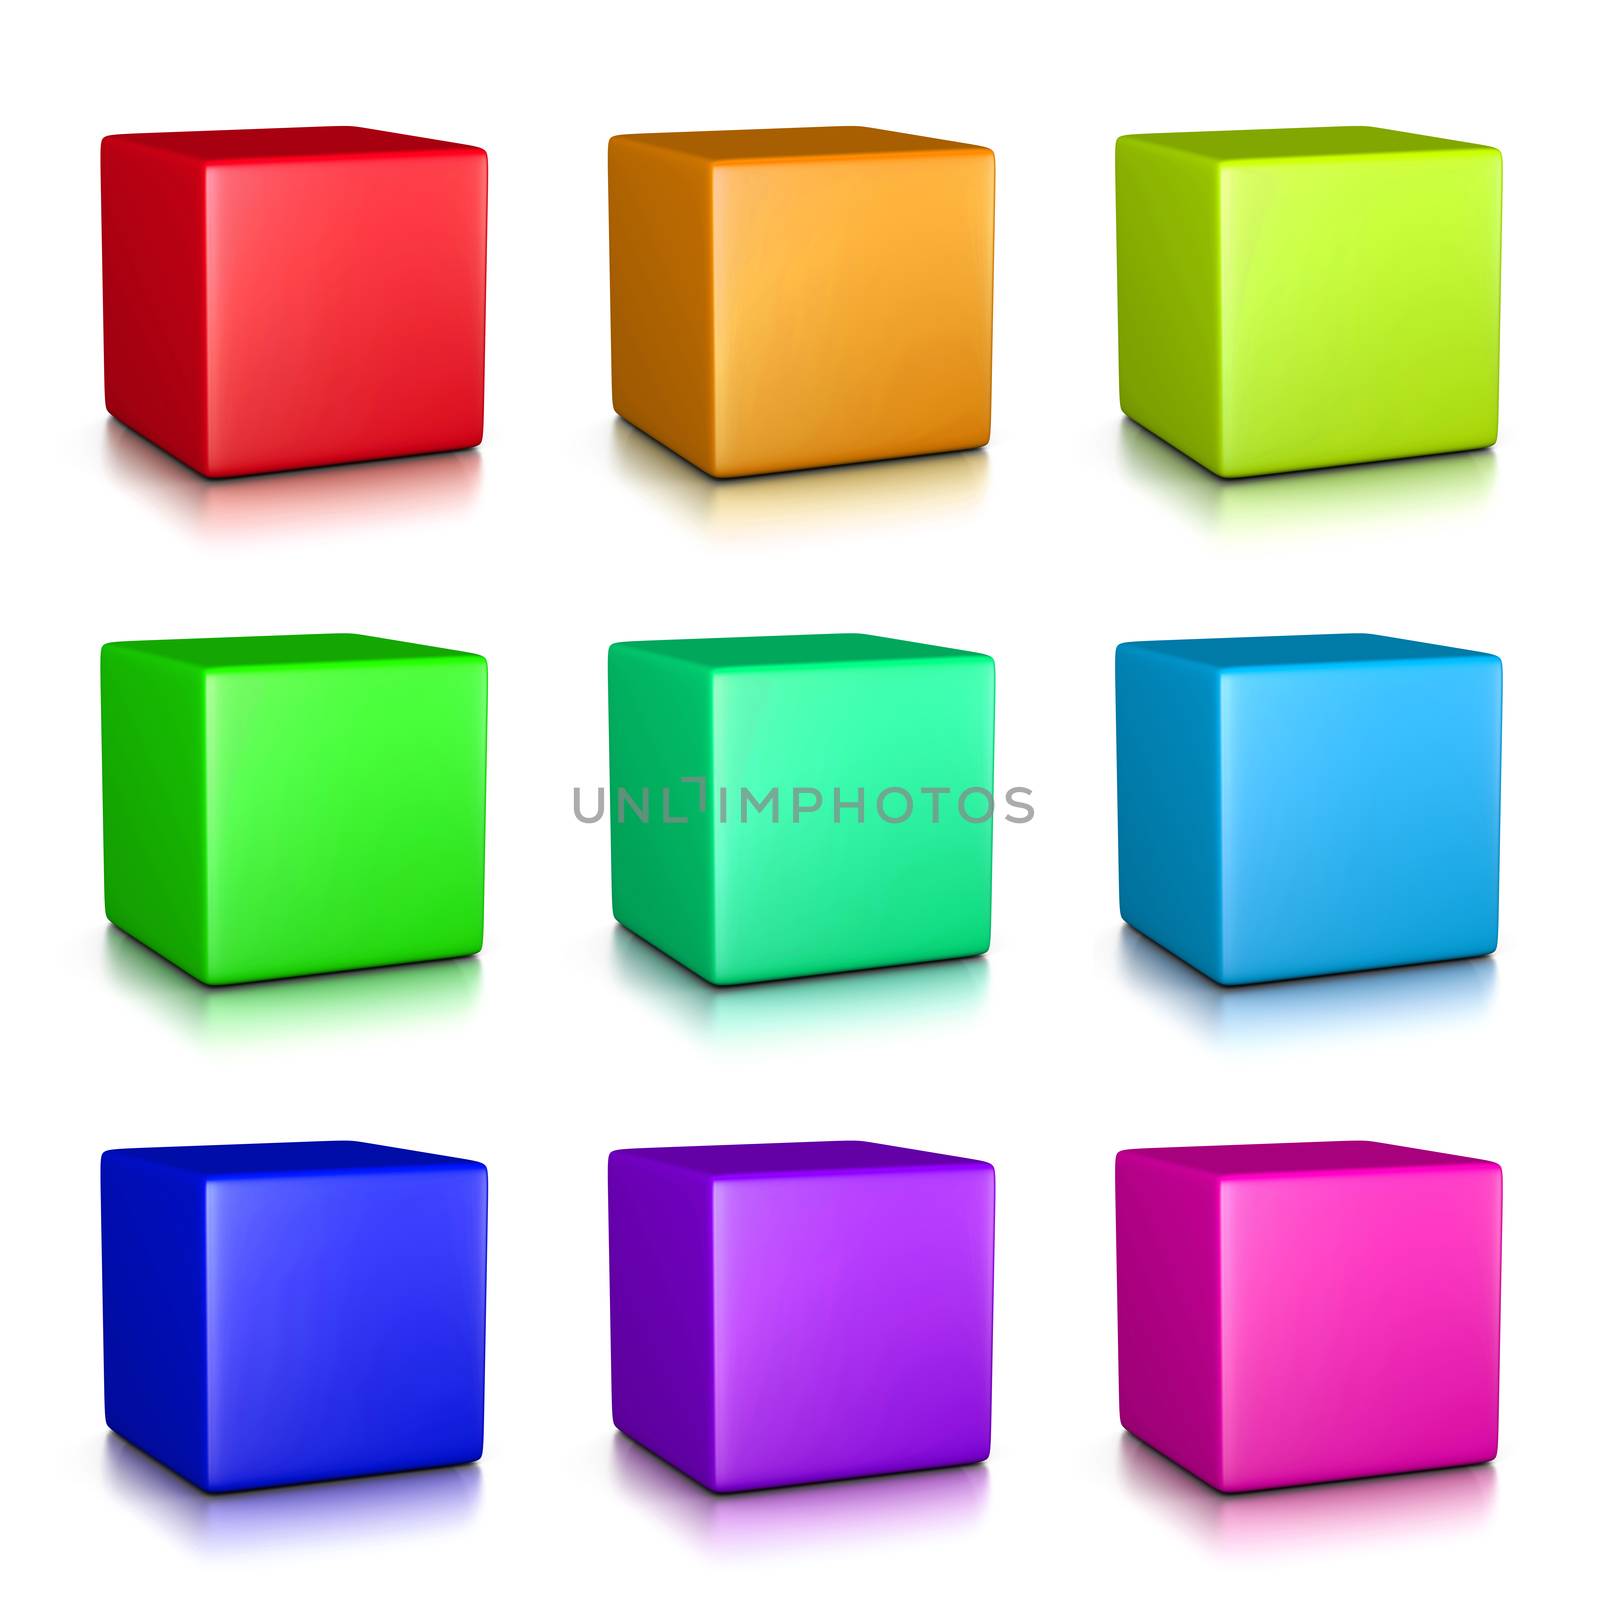 Colorful Cubes Collection on White Background 3D Illustration